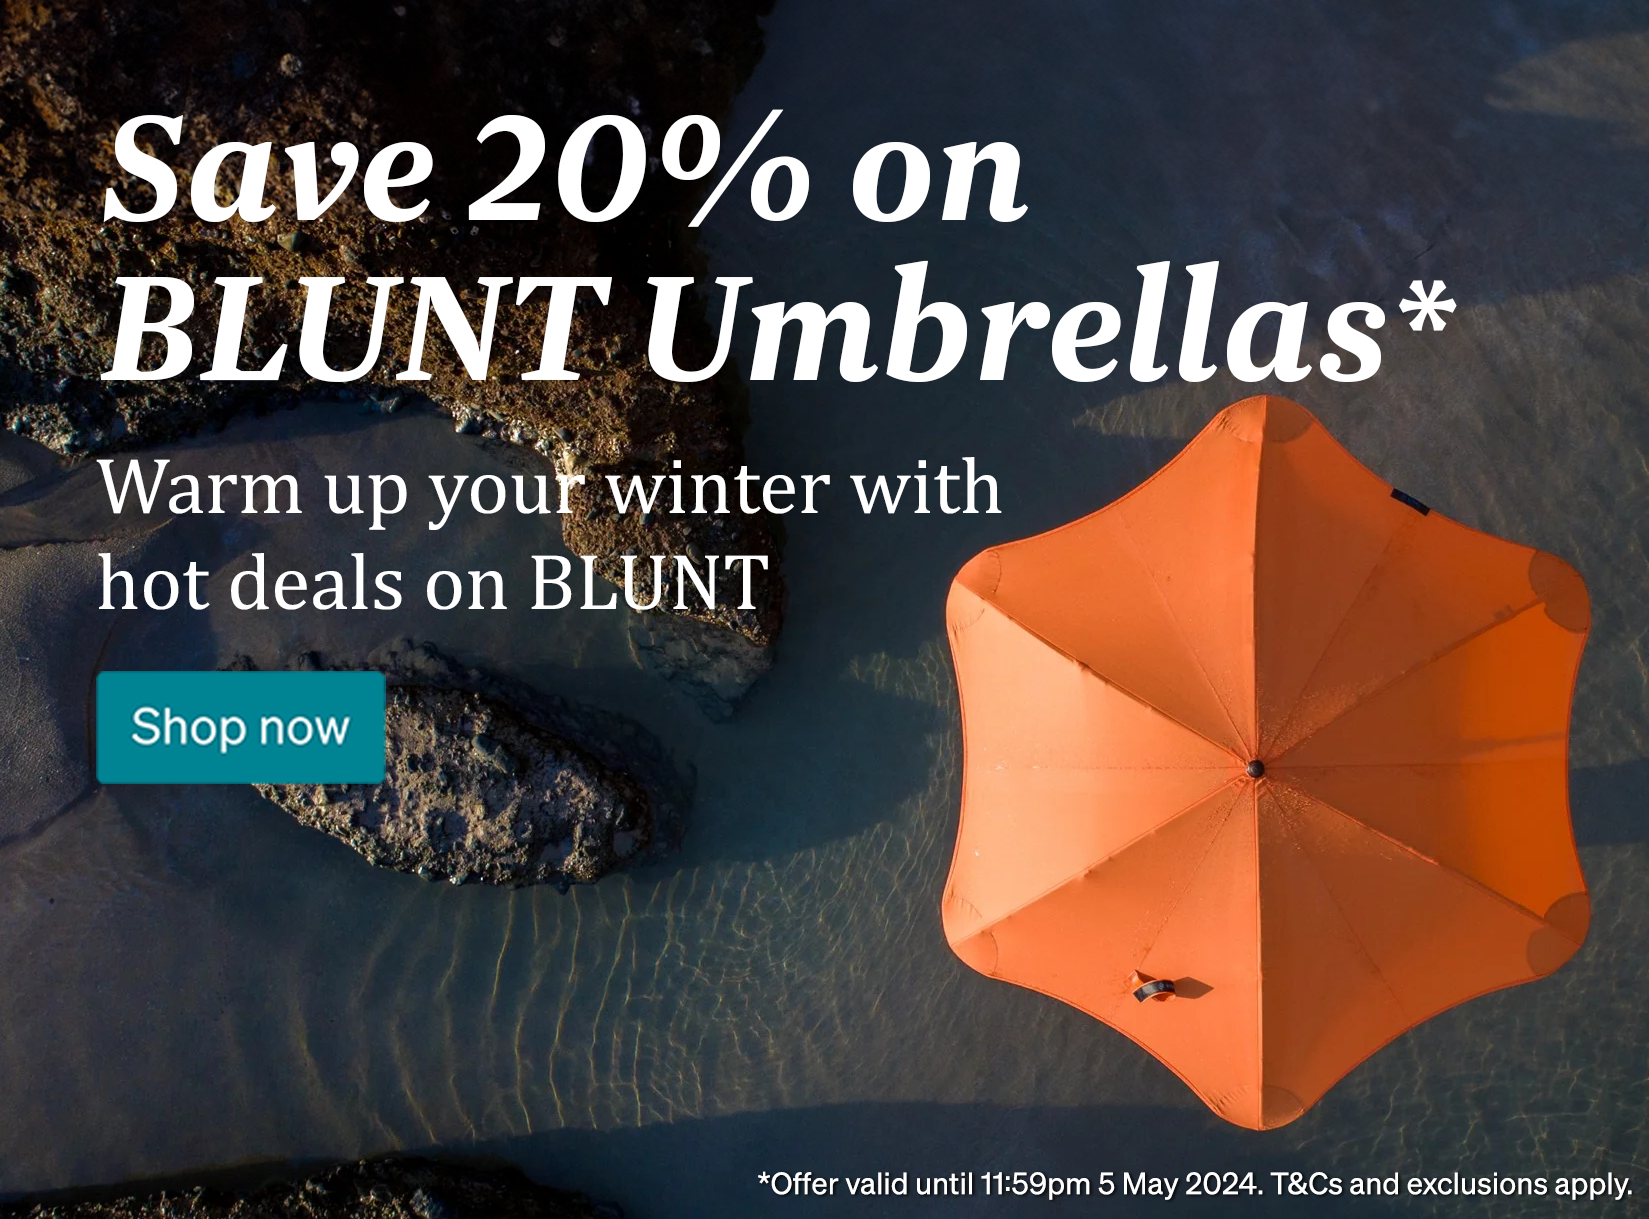 Save 20% off on BLUNT products. T&Cs and exclusions apply